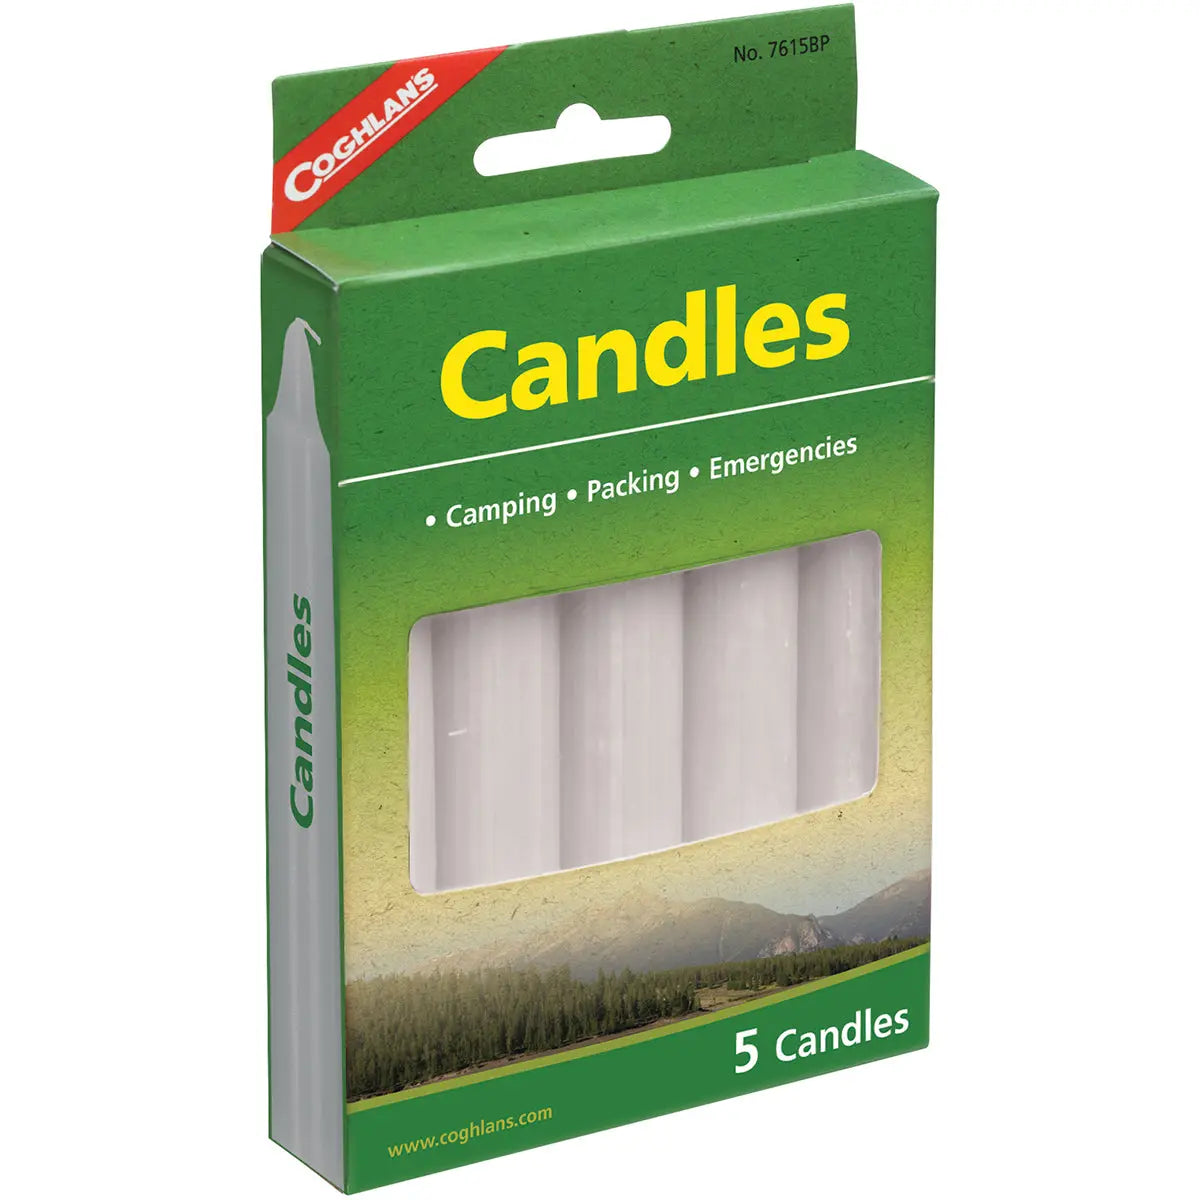 Coghlan's Candles (5 Count), Burns 4-5 hrs, Smokeless Dripless Emergency Camping Coghlan's